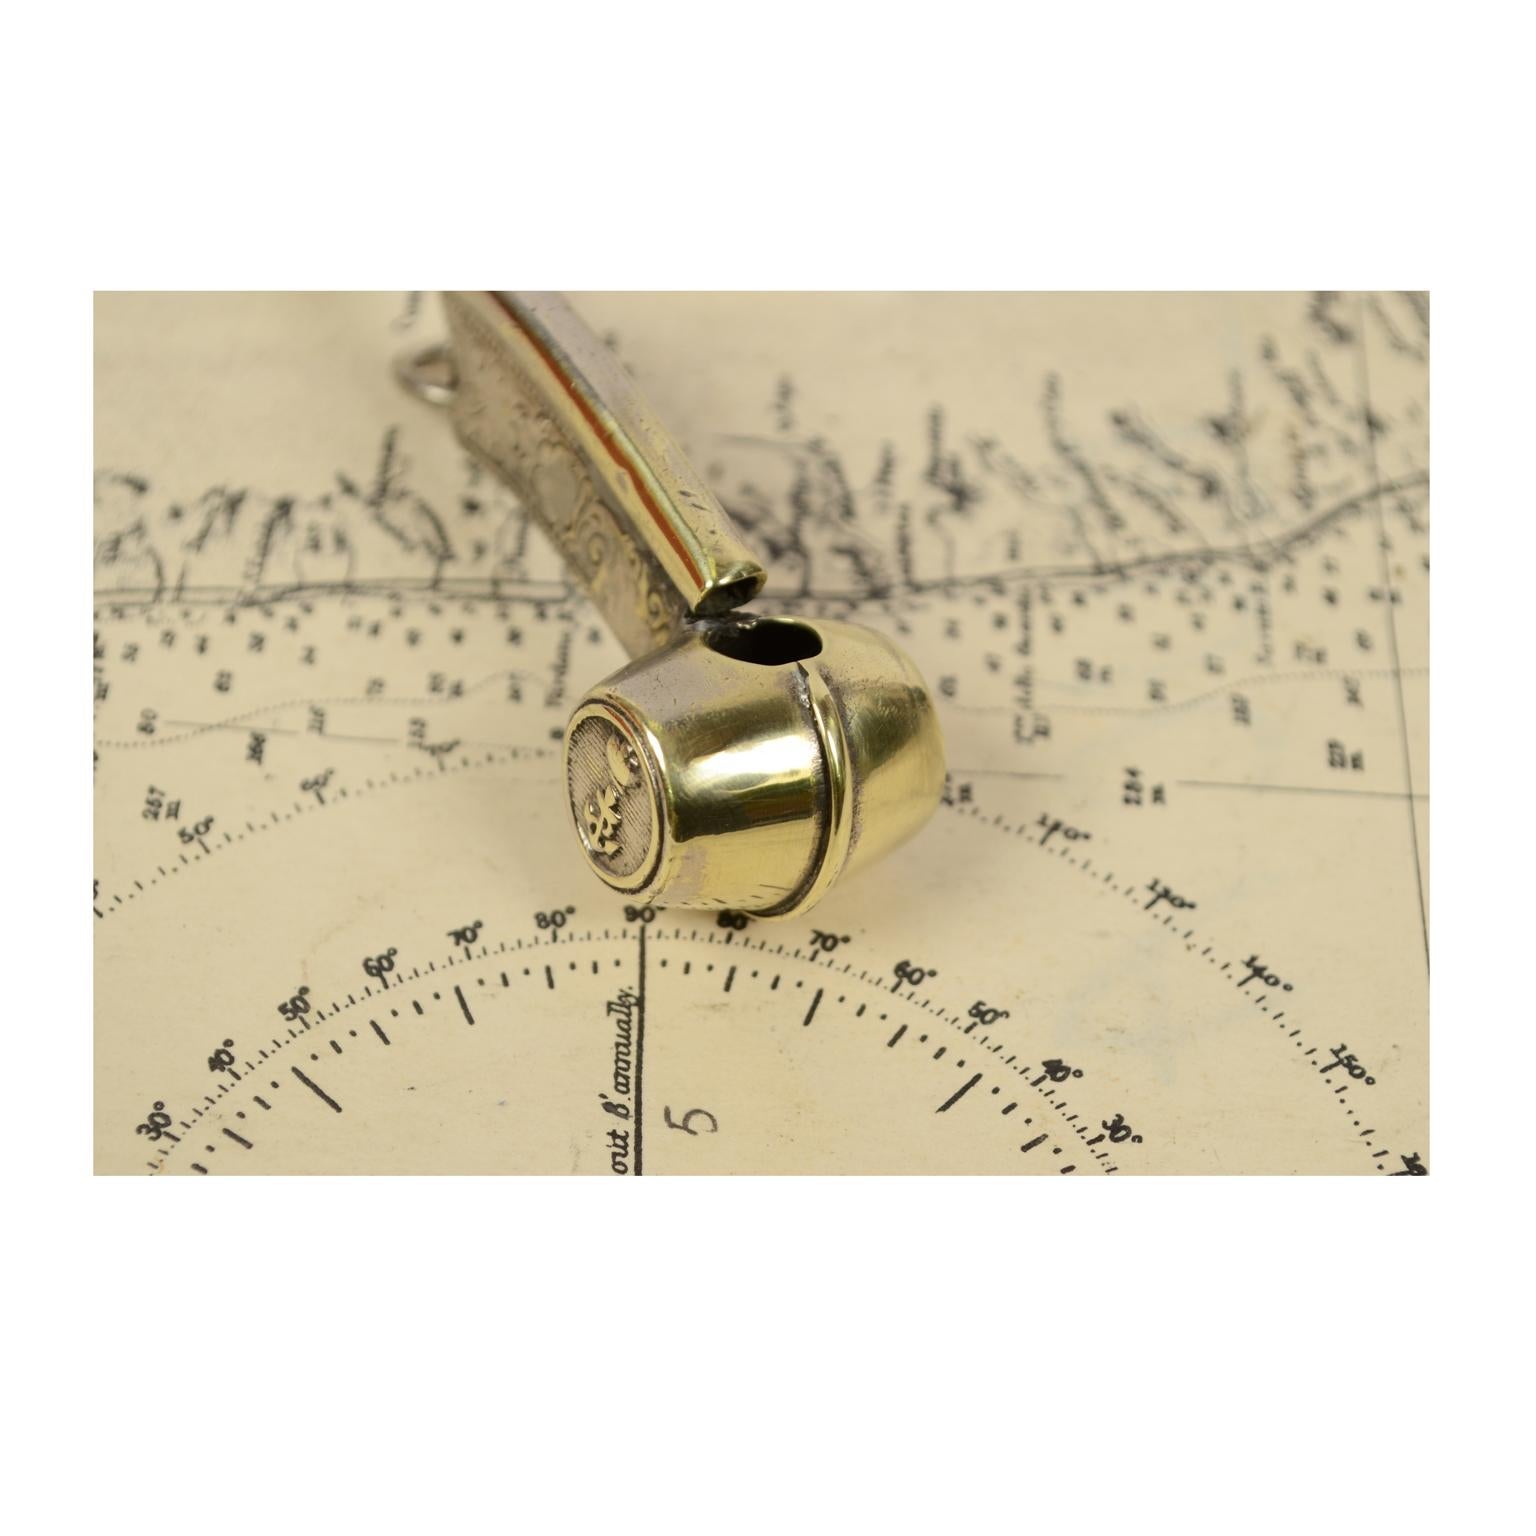 how to use a boatswain whistle